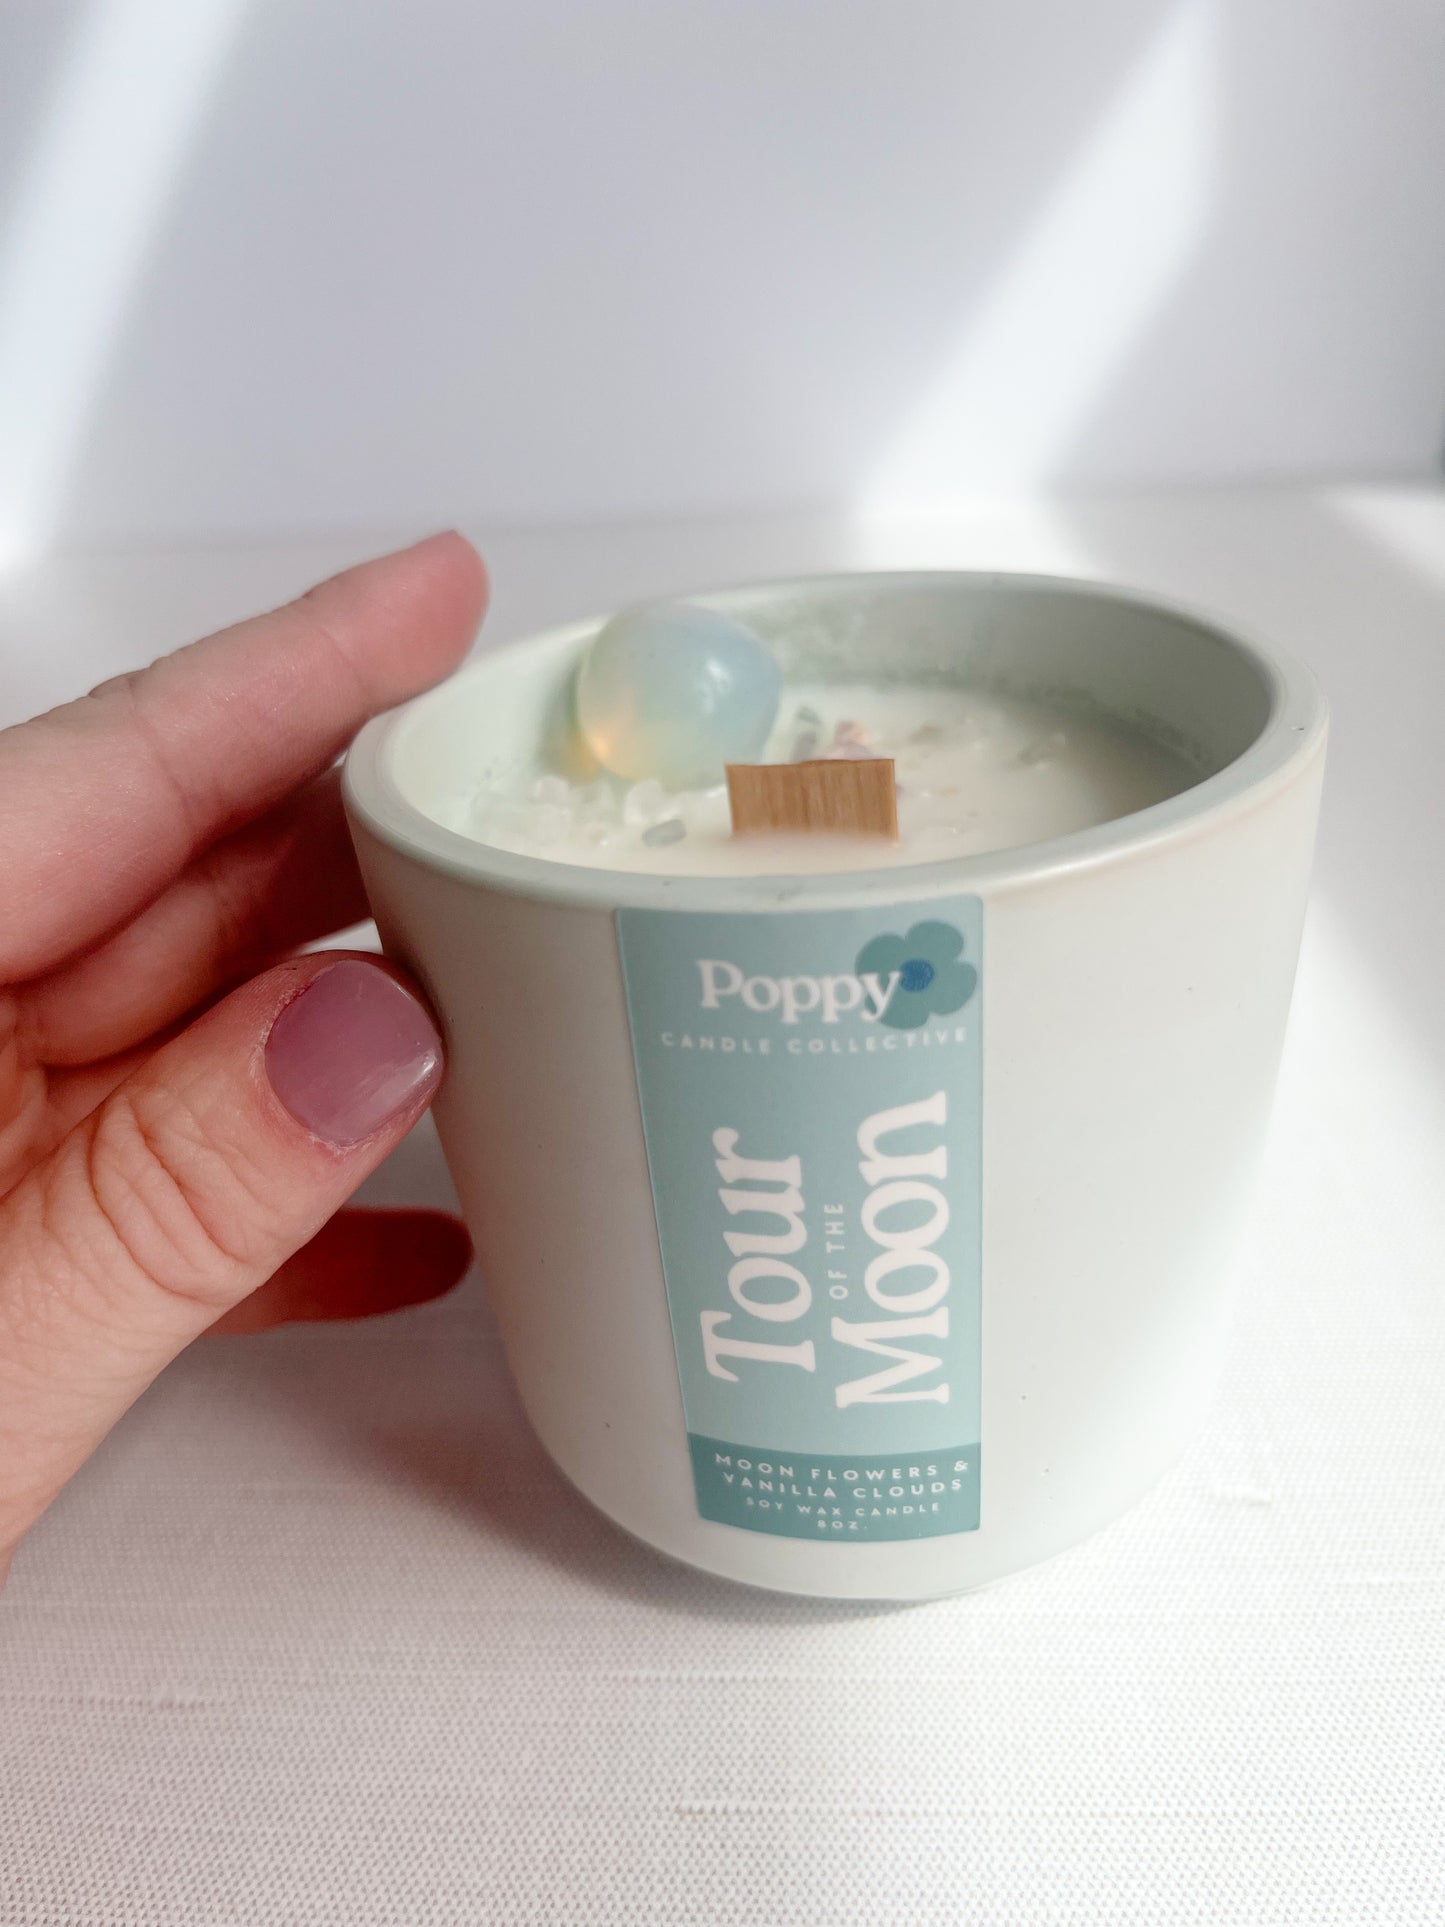 Tour of the Moon • Moon Flower & Vanilla Clouds Candle